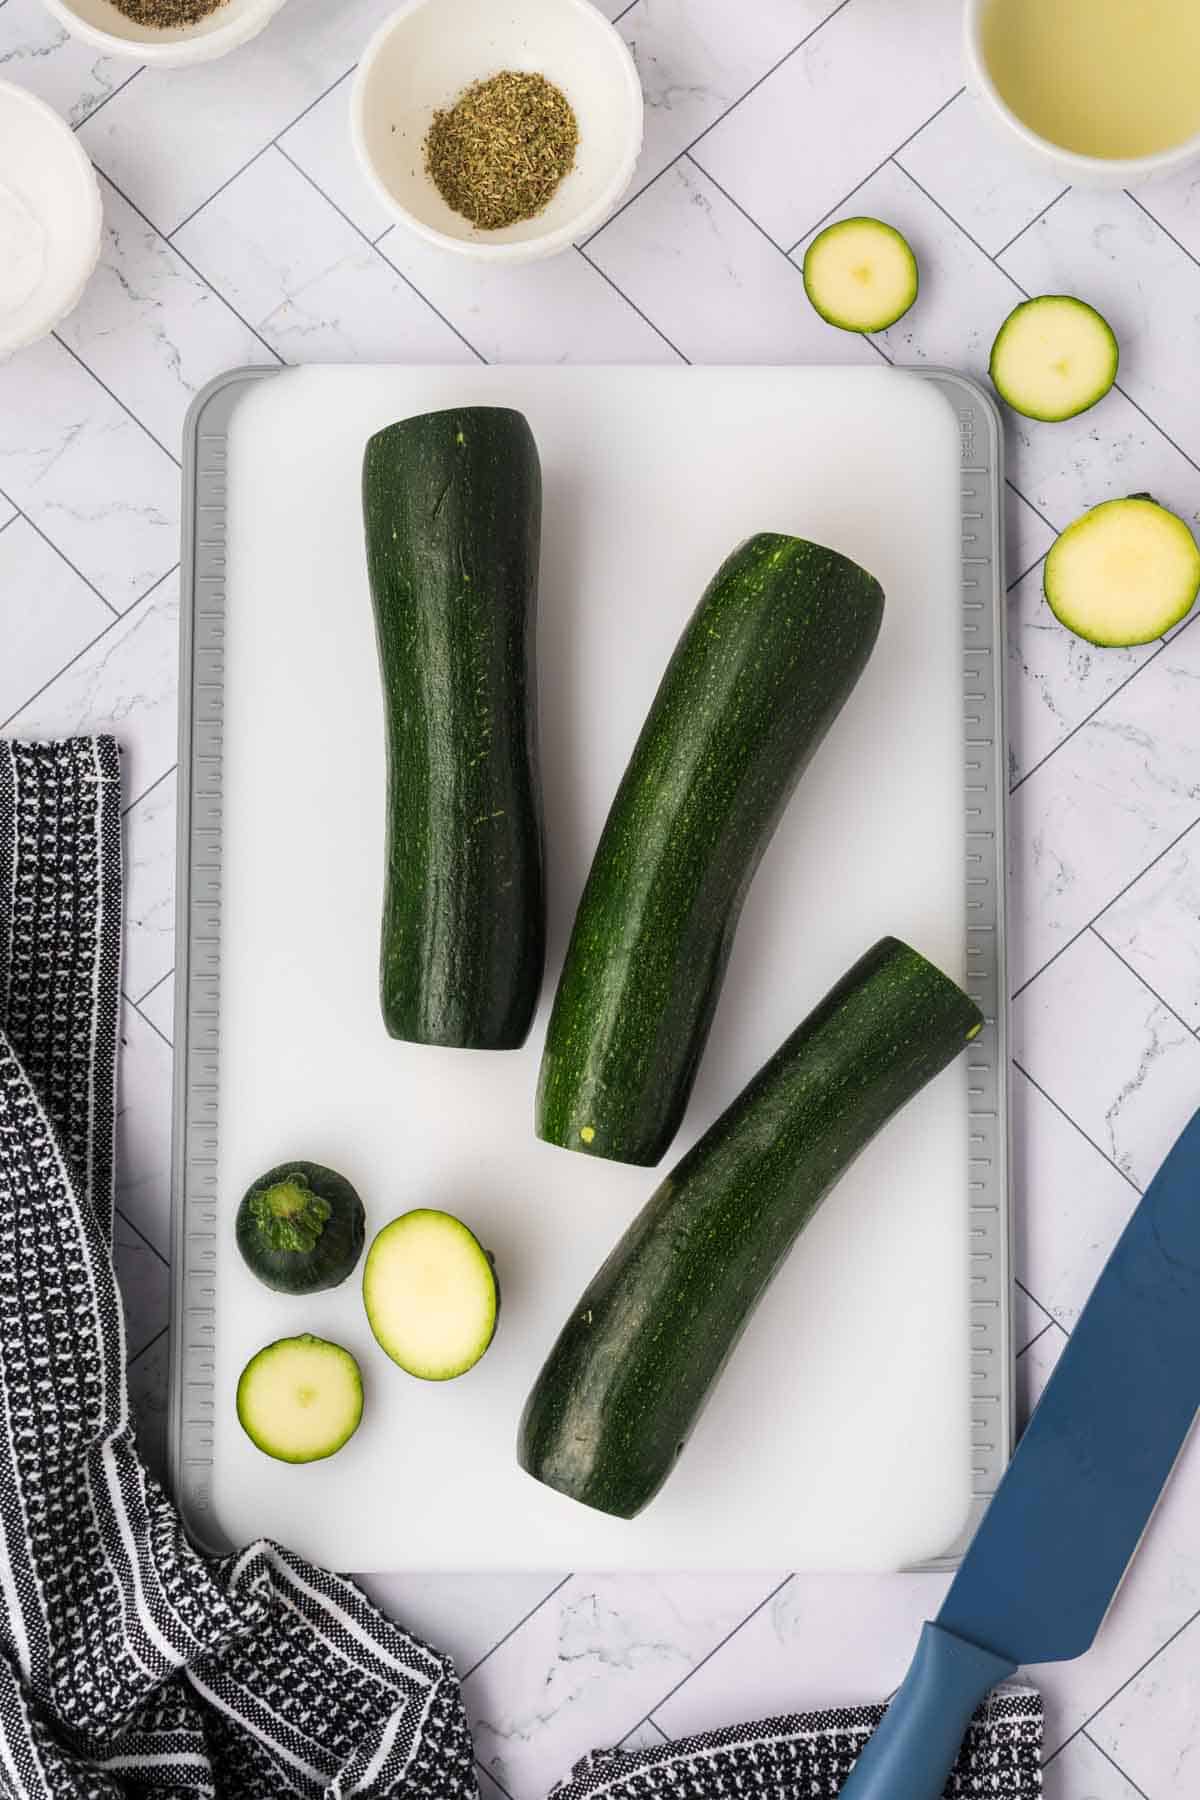 Zucchini on a cutting board with the ends cut off